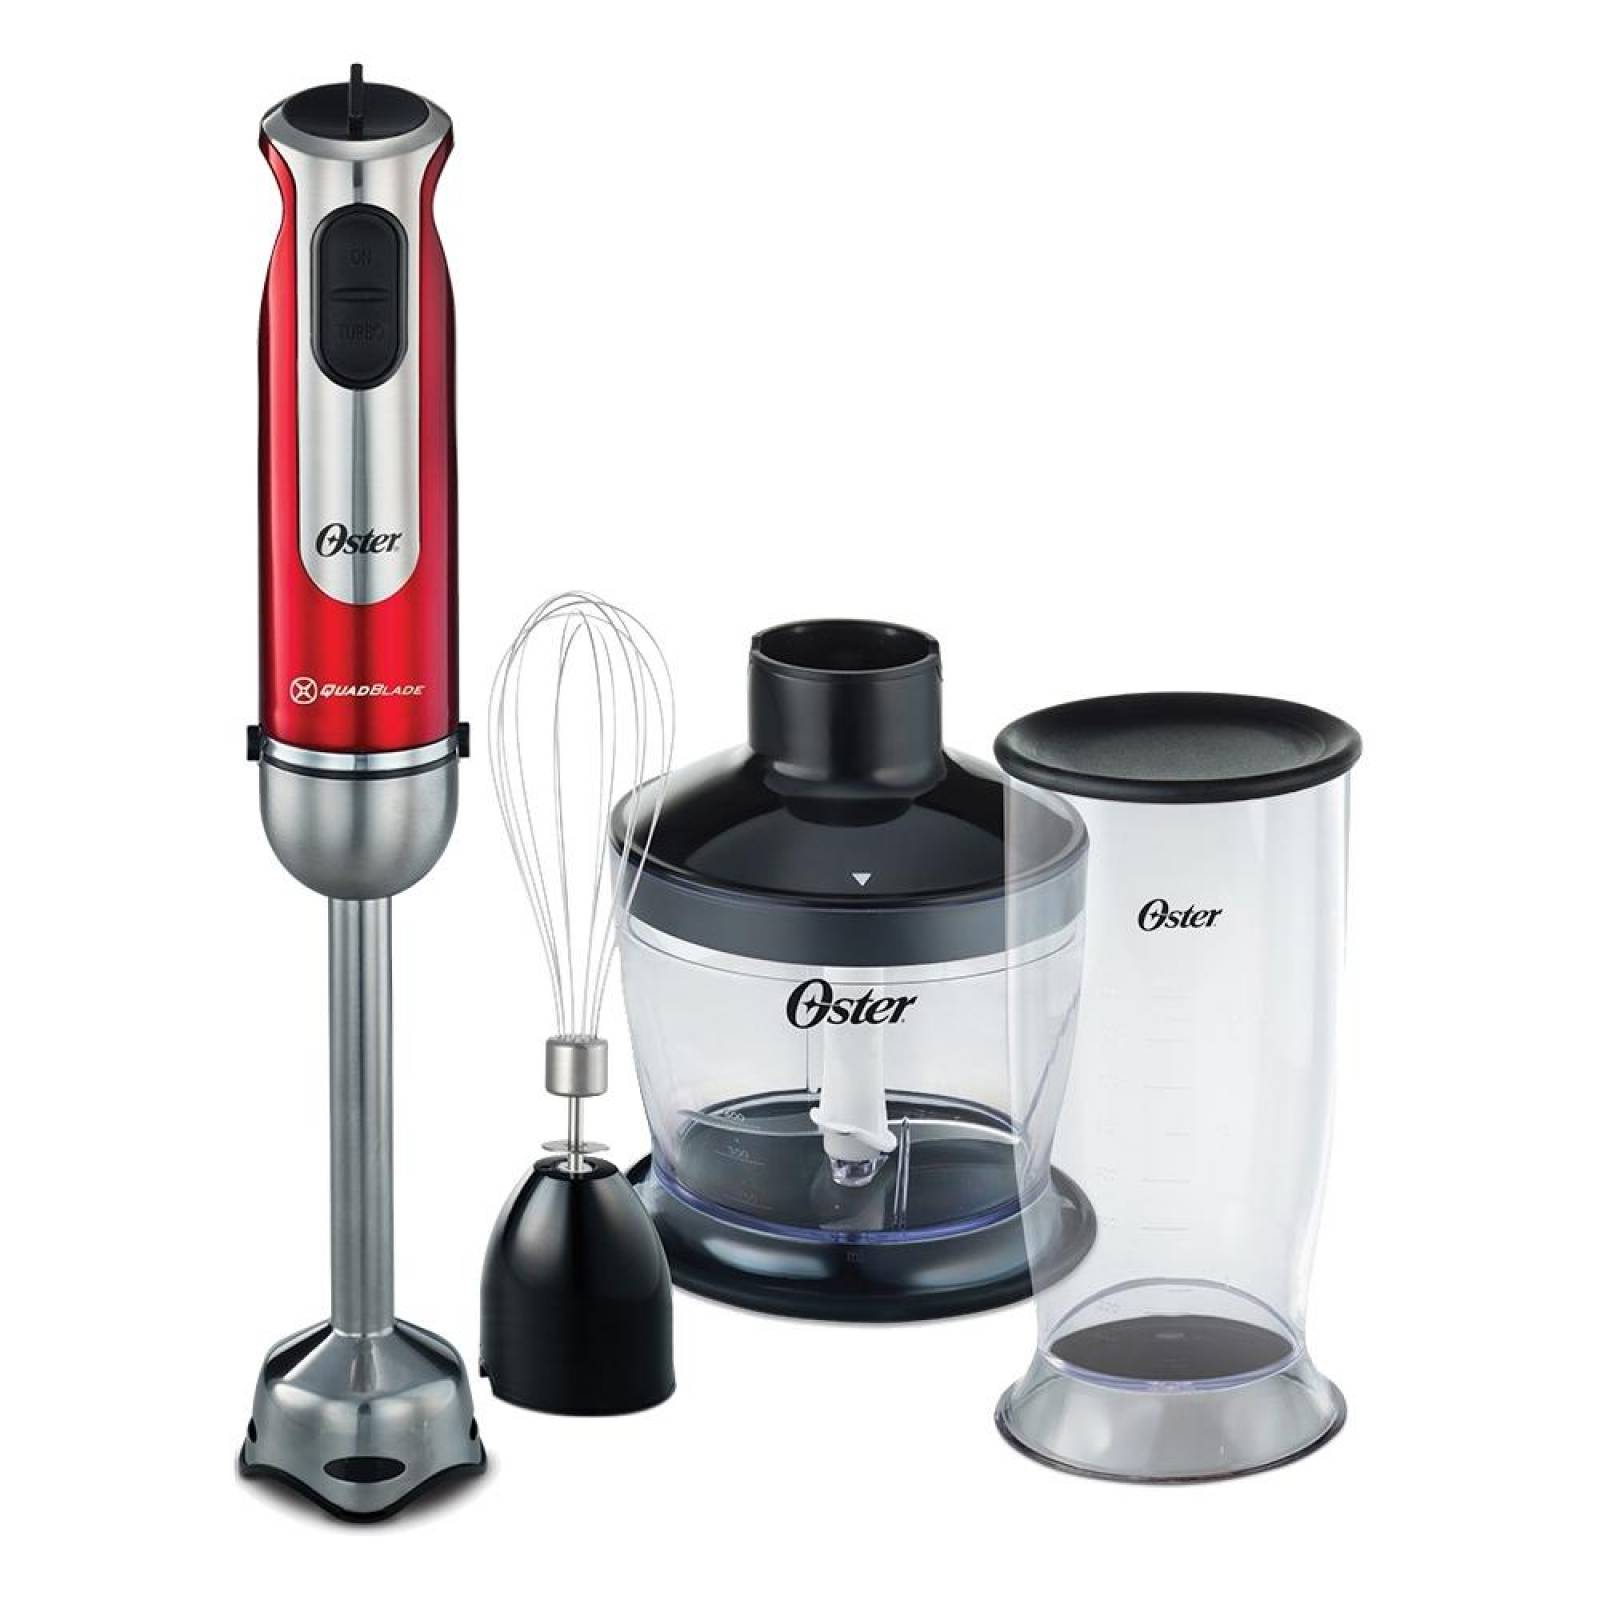 Stick mixer Oster® con accesorios FPSTHB2801 - Oster